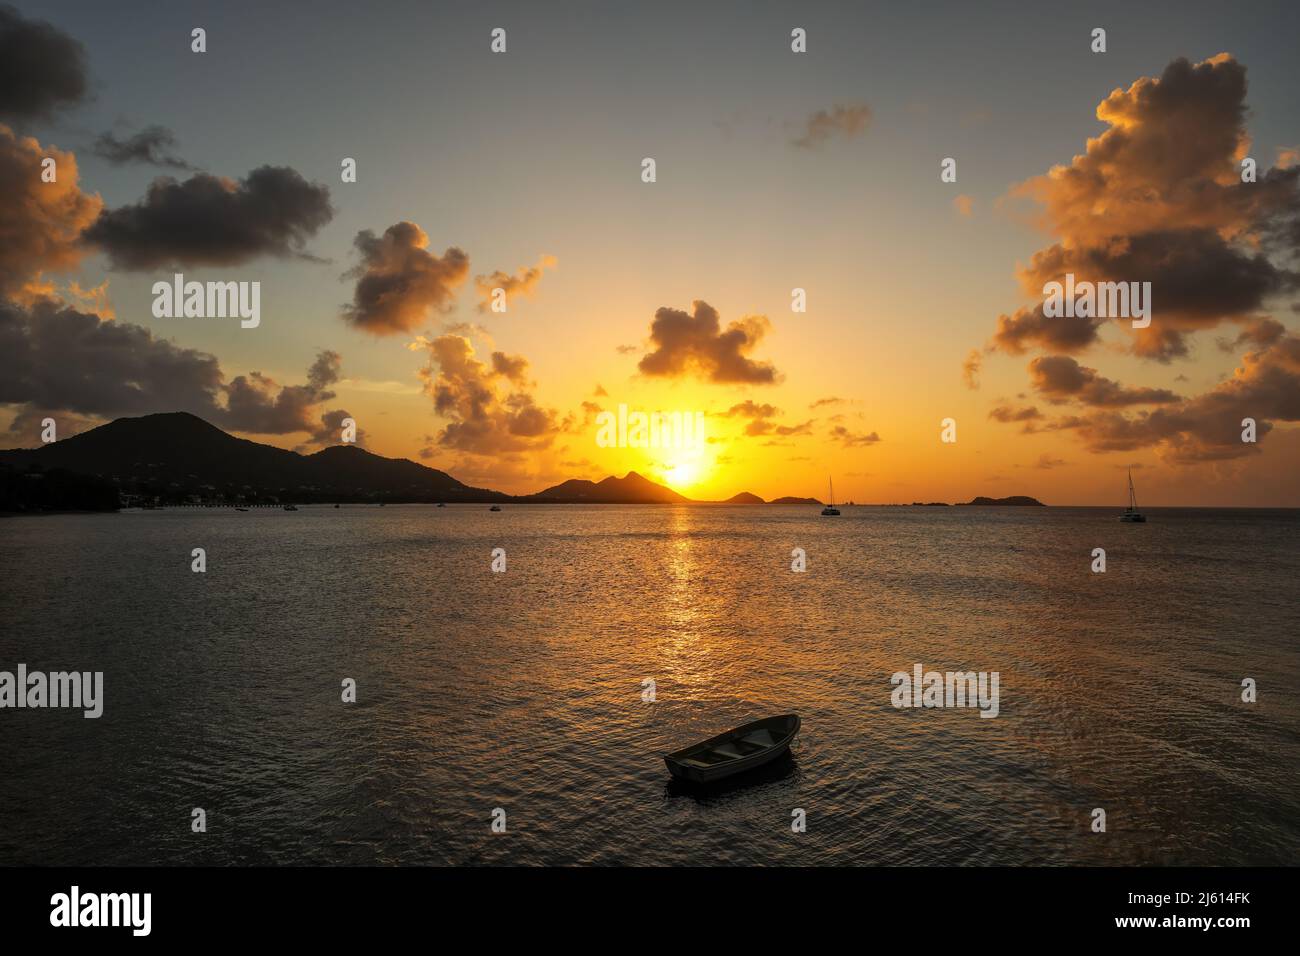 Sunset over Hillsborough Bay, Carriacou Island, Grenada. Hillsborough is the largest town on the island. Stock Photo